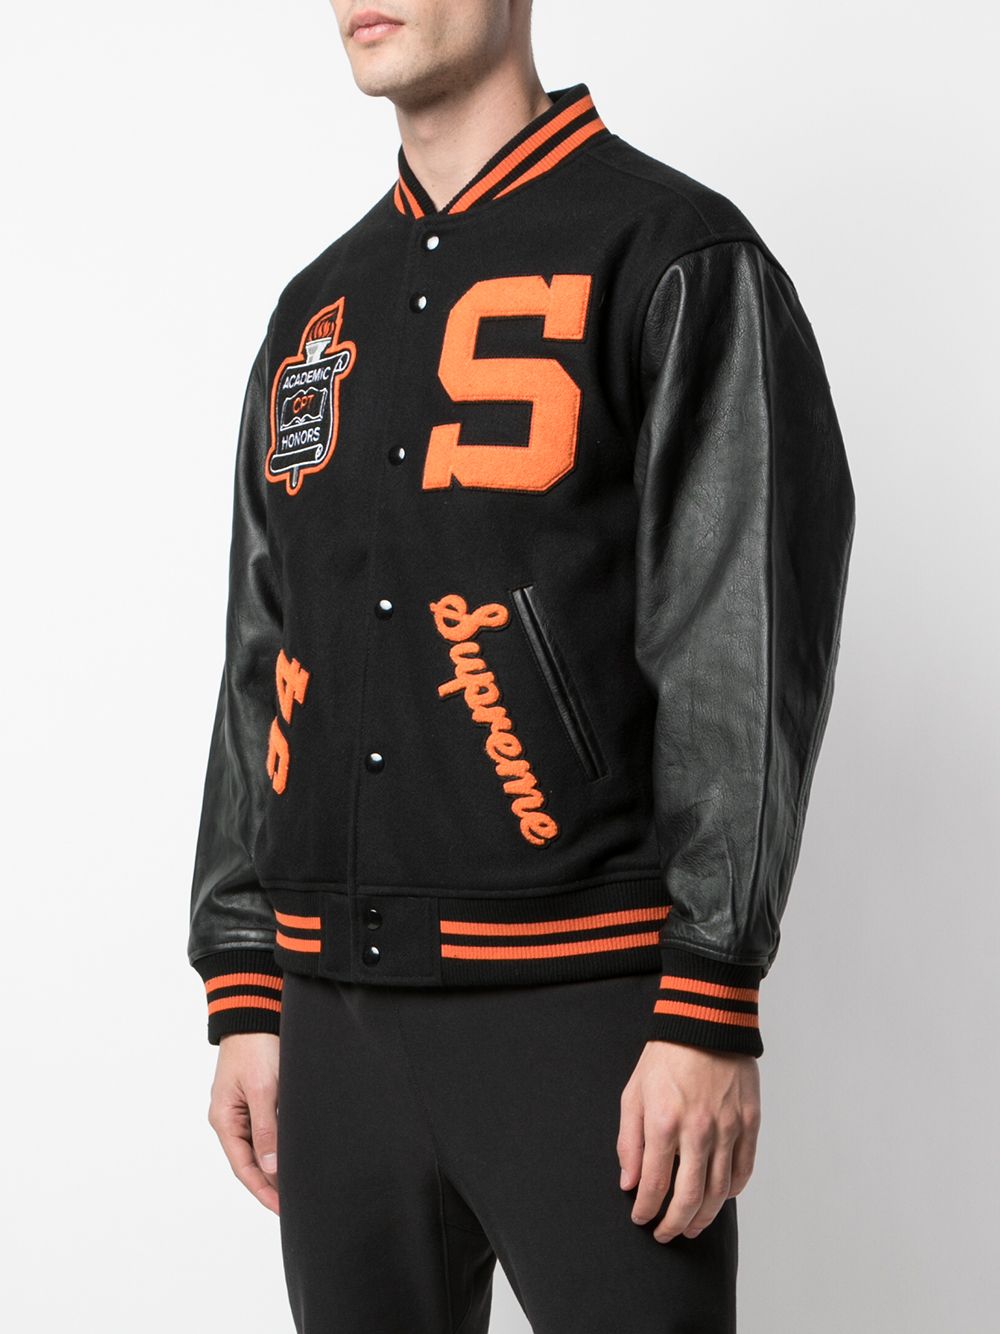 Shop Supreme Team Varsity Jacket with Express Delivery - FARFETCH